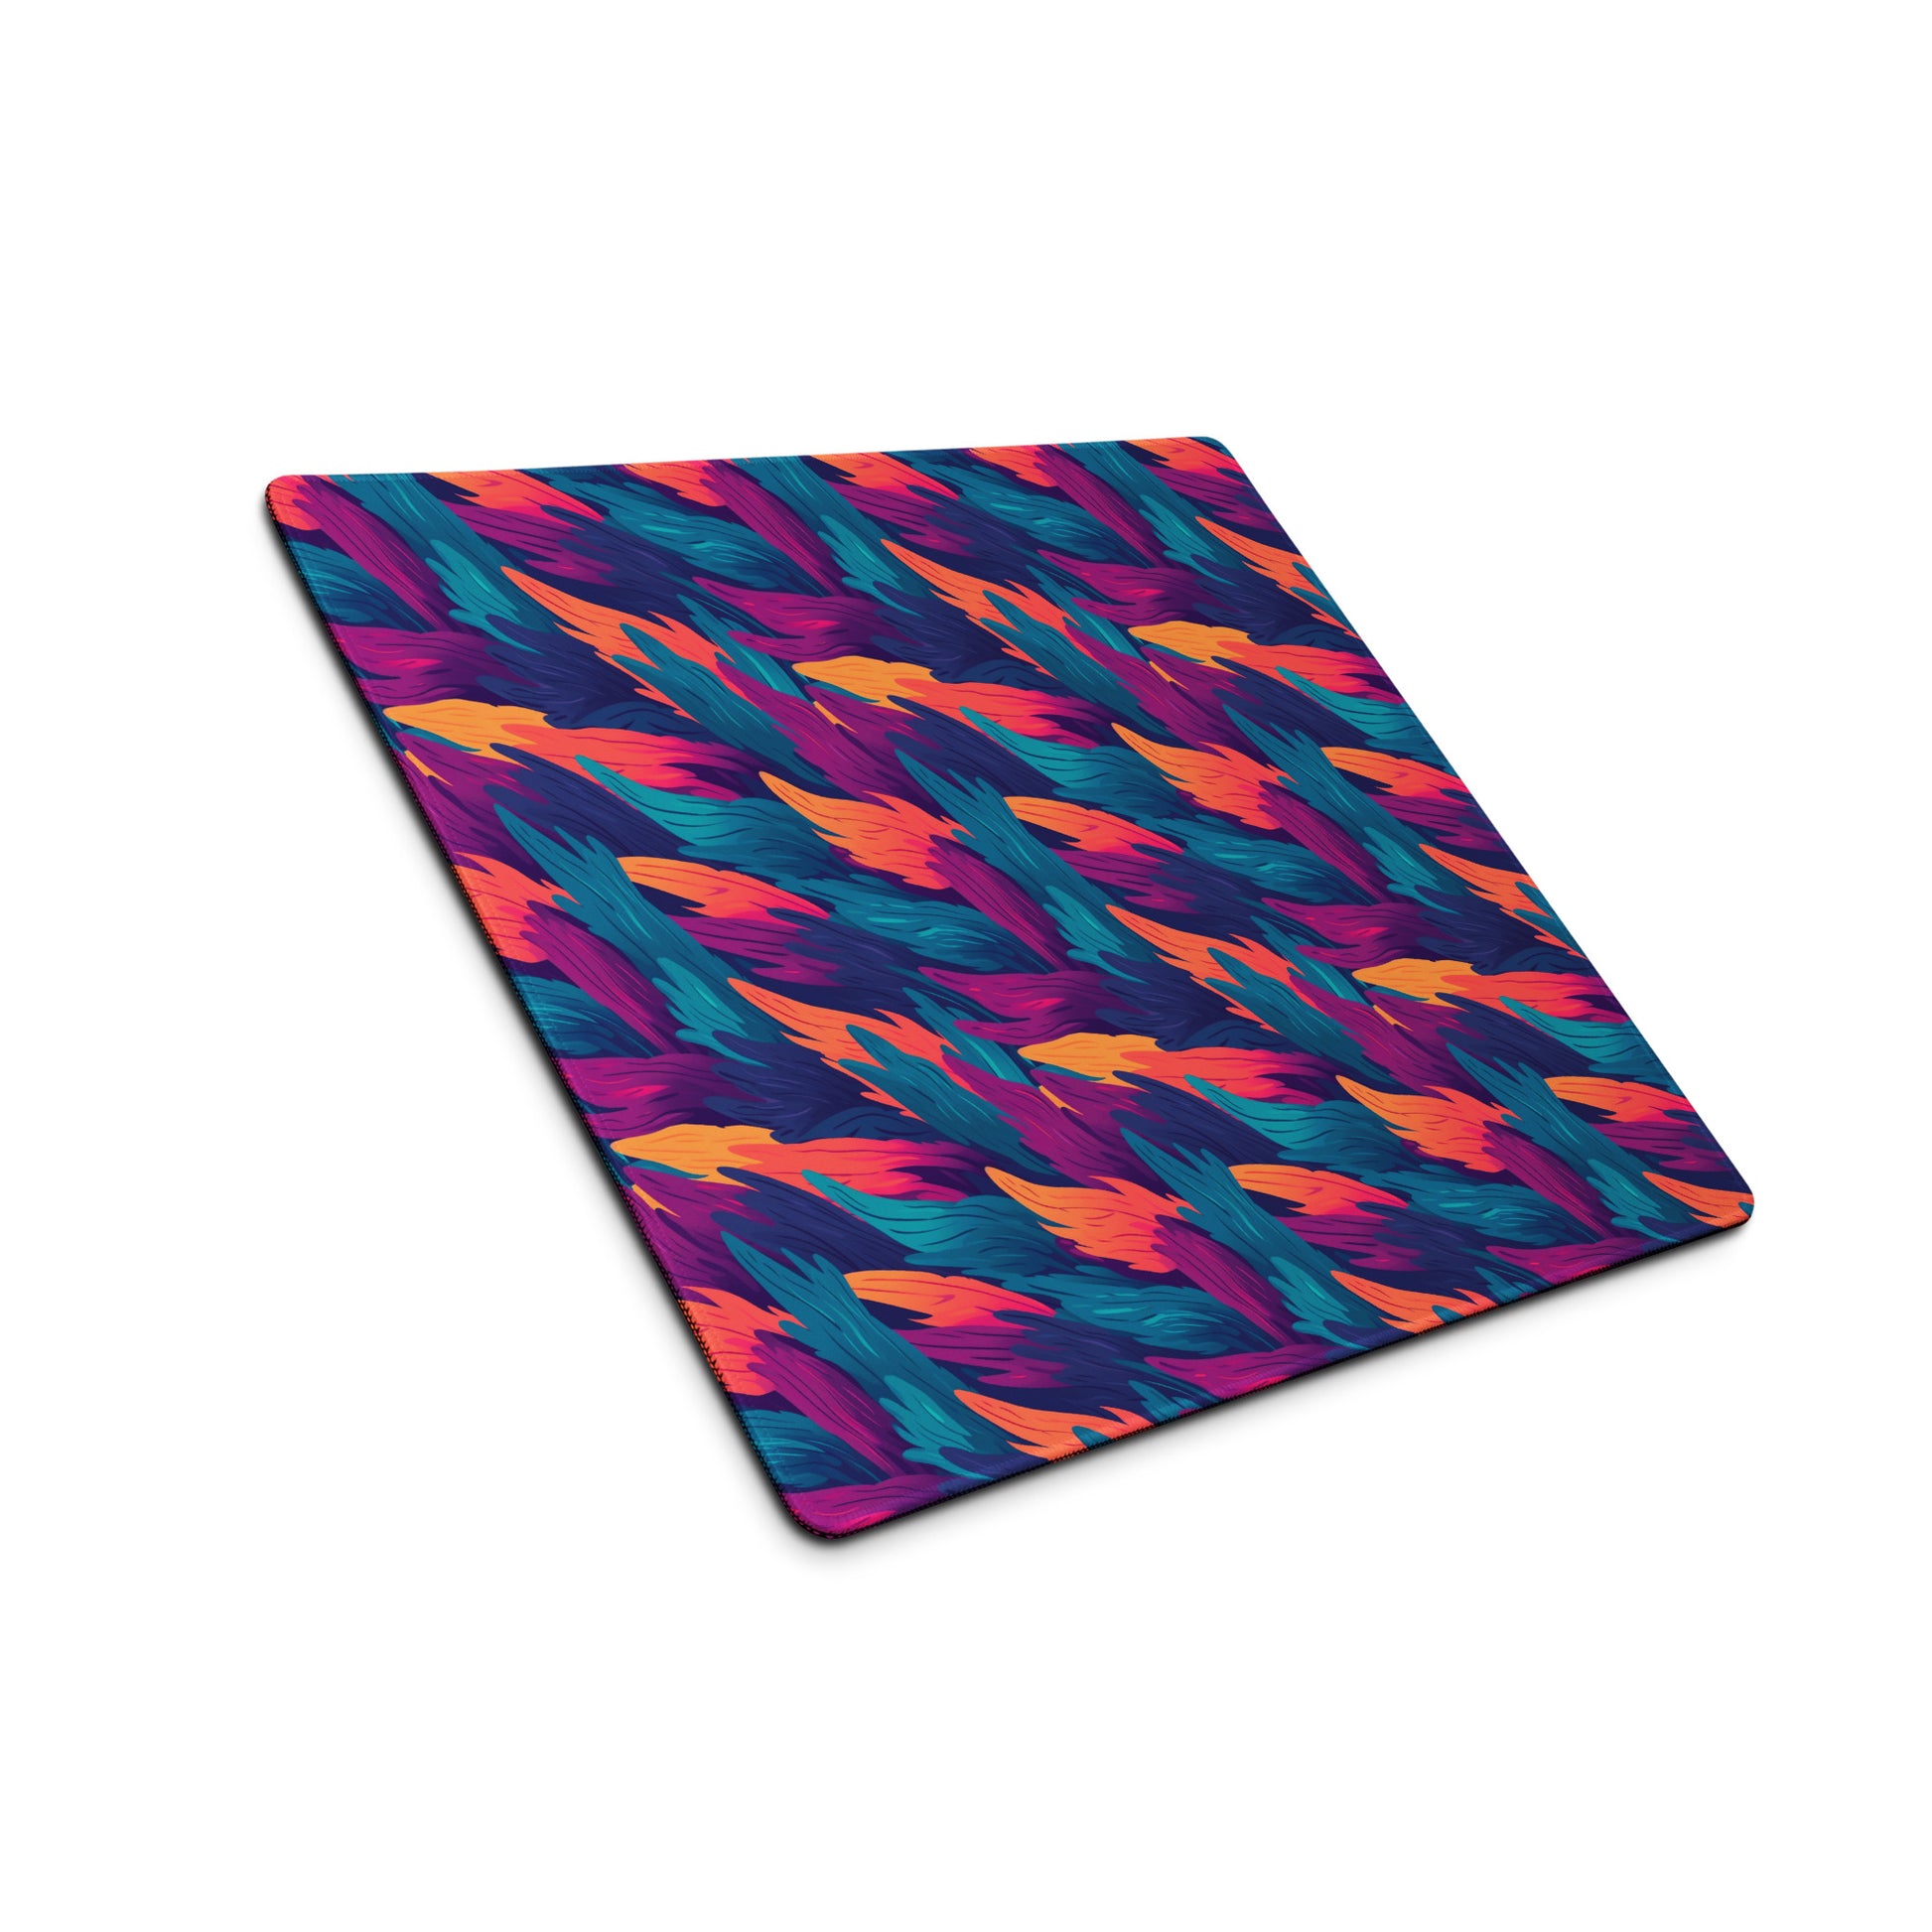 A 18" x 16" desk pad with a wavy flame pattern on it shown at an angle. Blue, Orange and Purple in color.